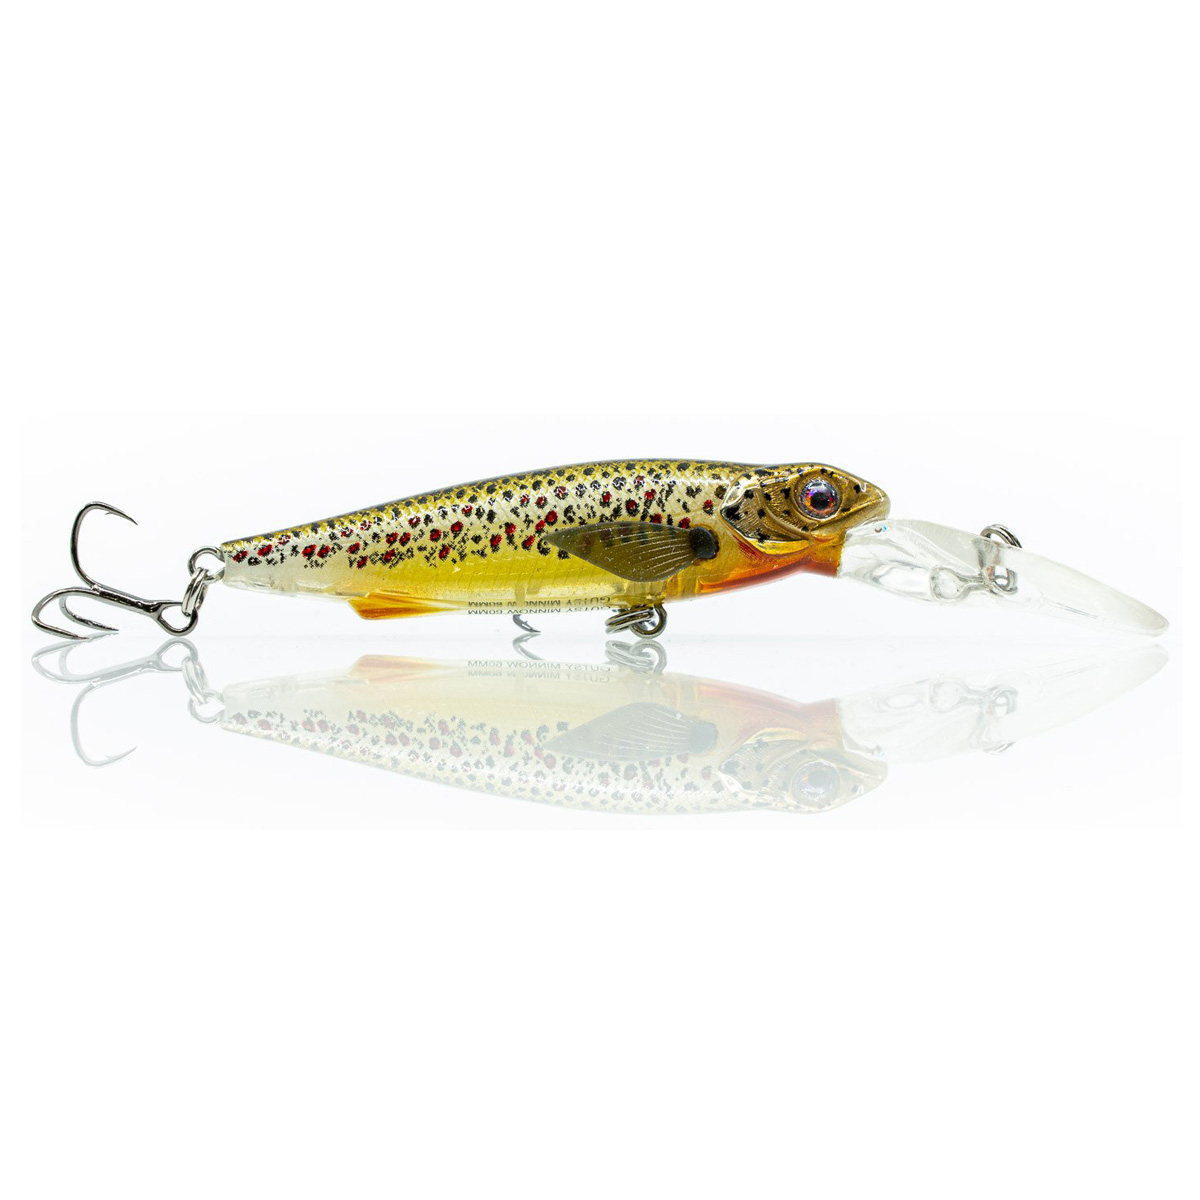 Chasebaits Gutsy Minnow Shallow Hard Body Lure Brown Trout